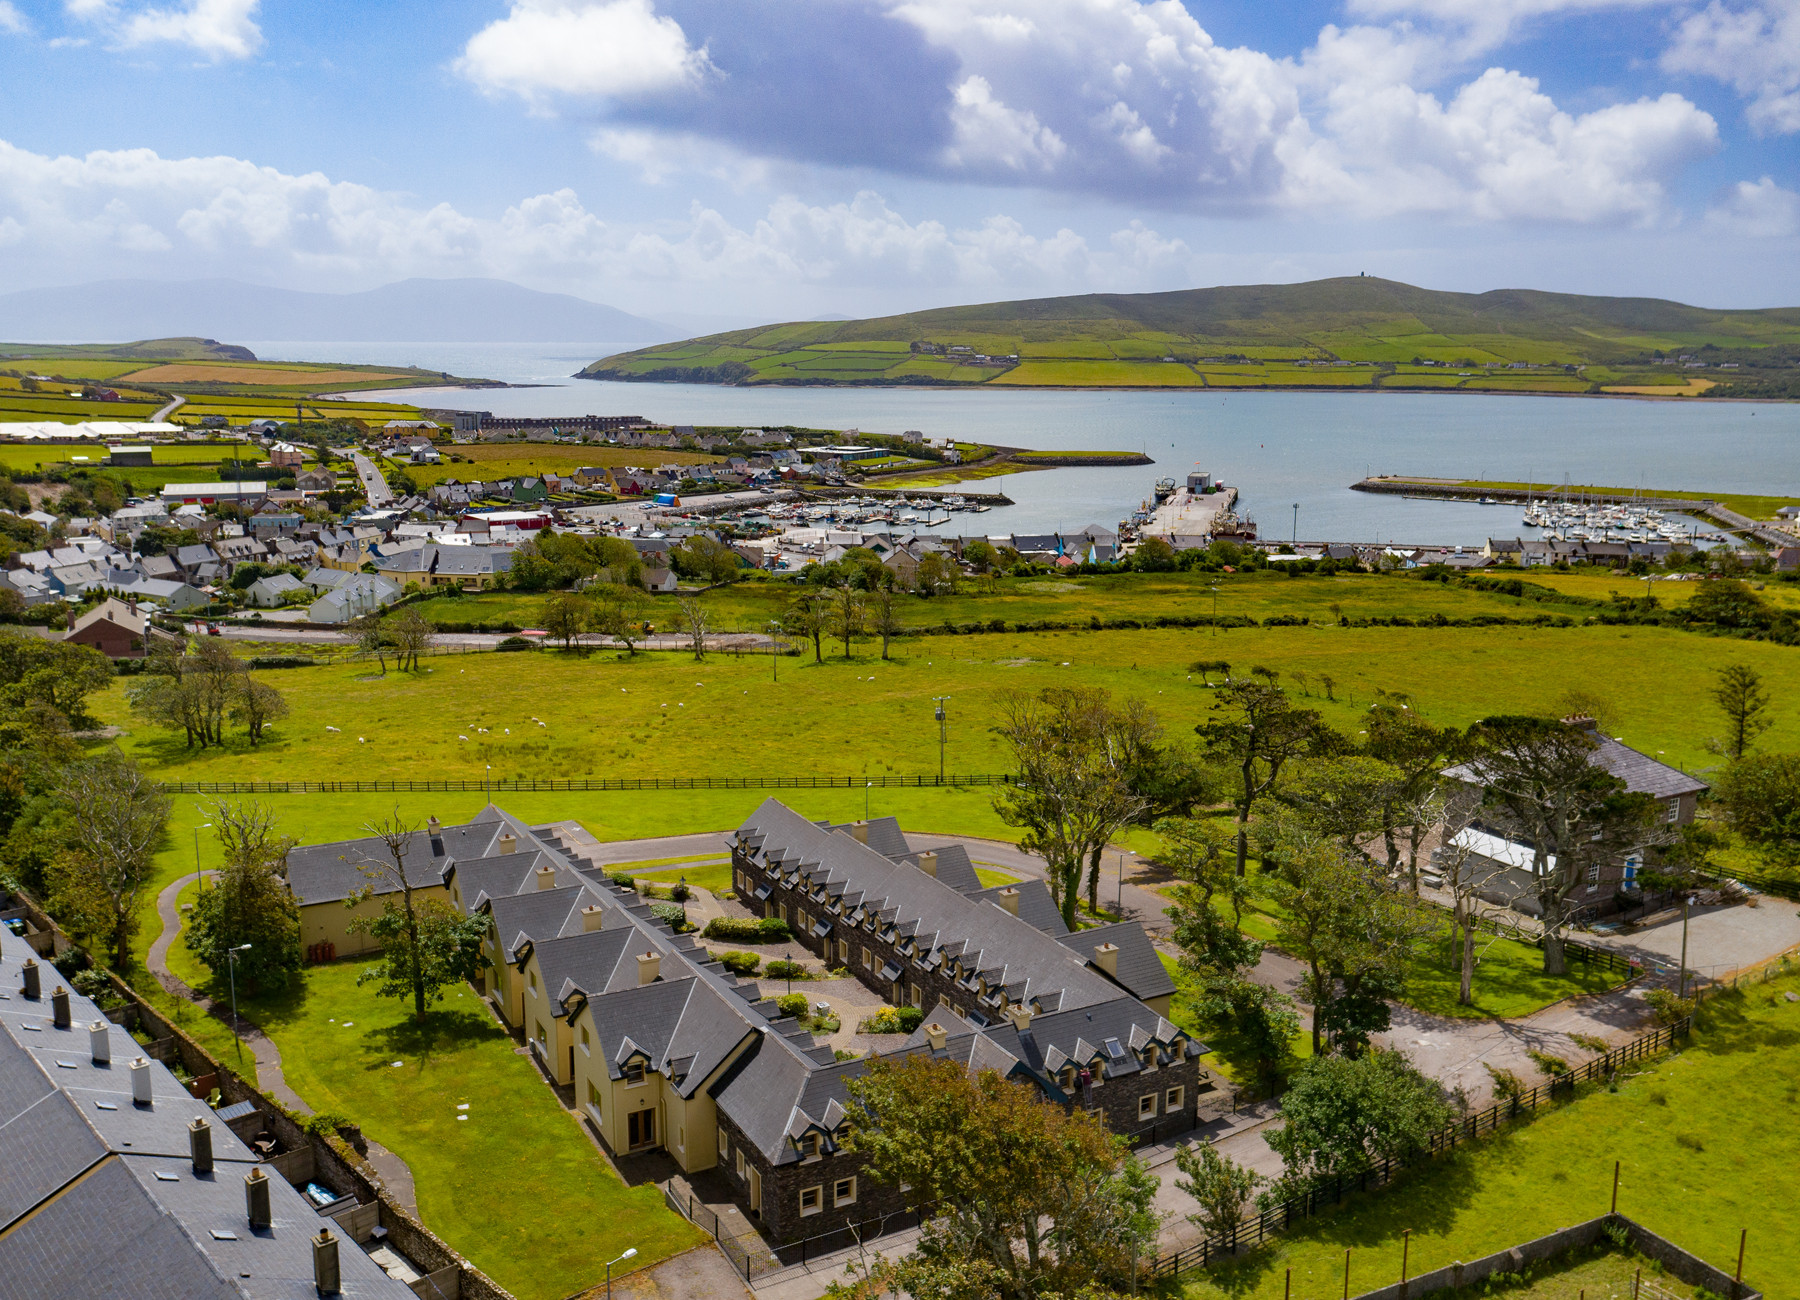 2022 On Sale Now | Book Your 2022 Holiday Home in Ireland Today - Offer